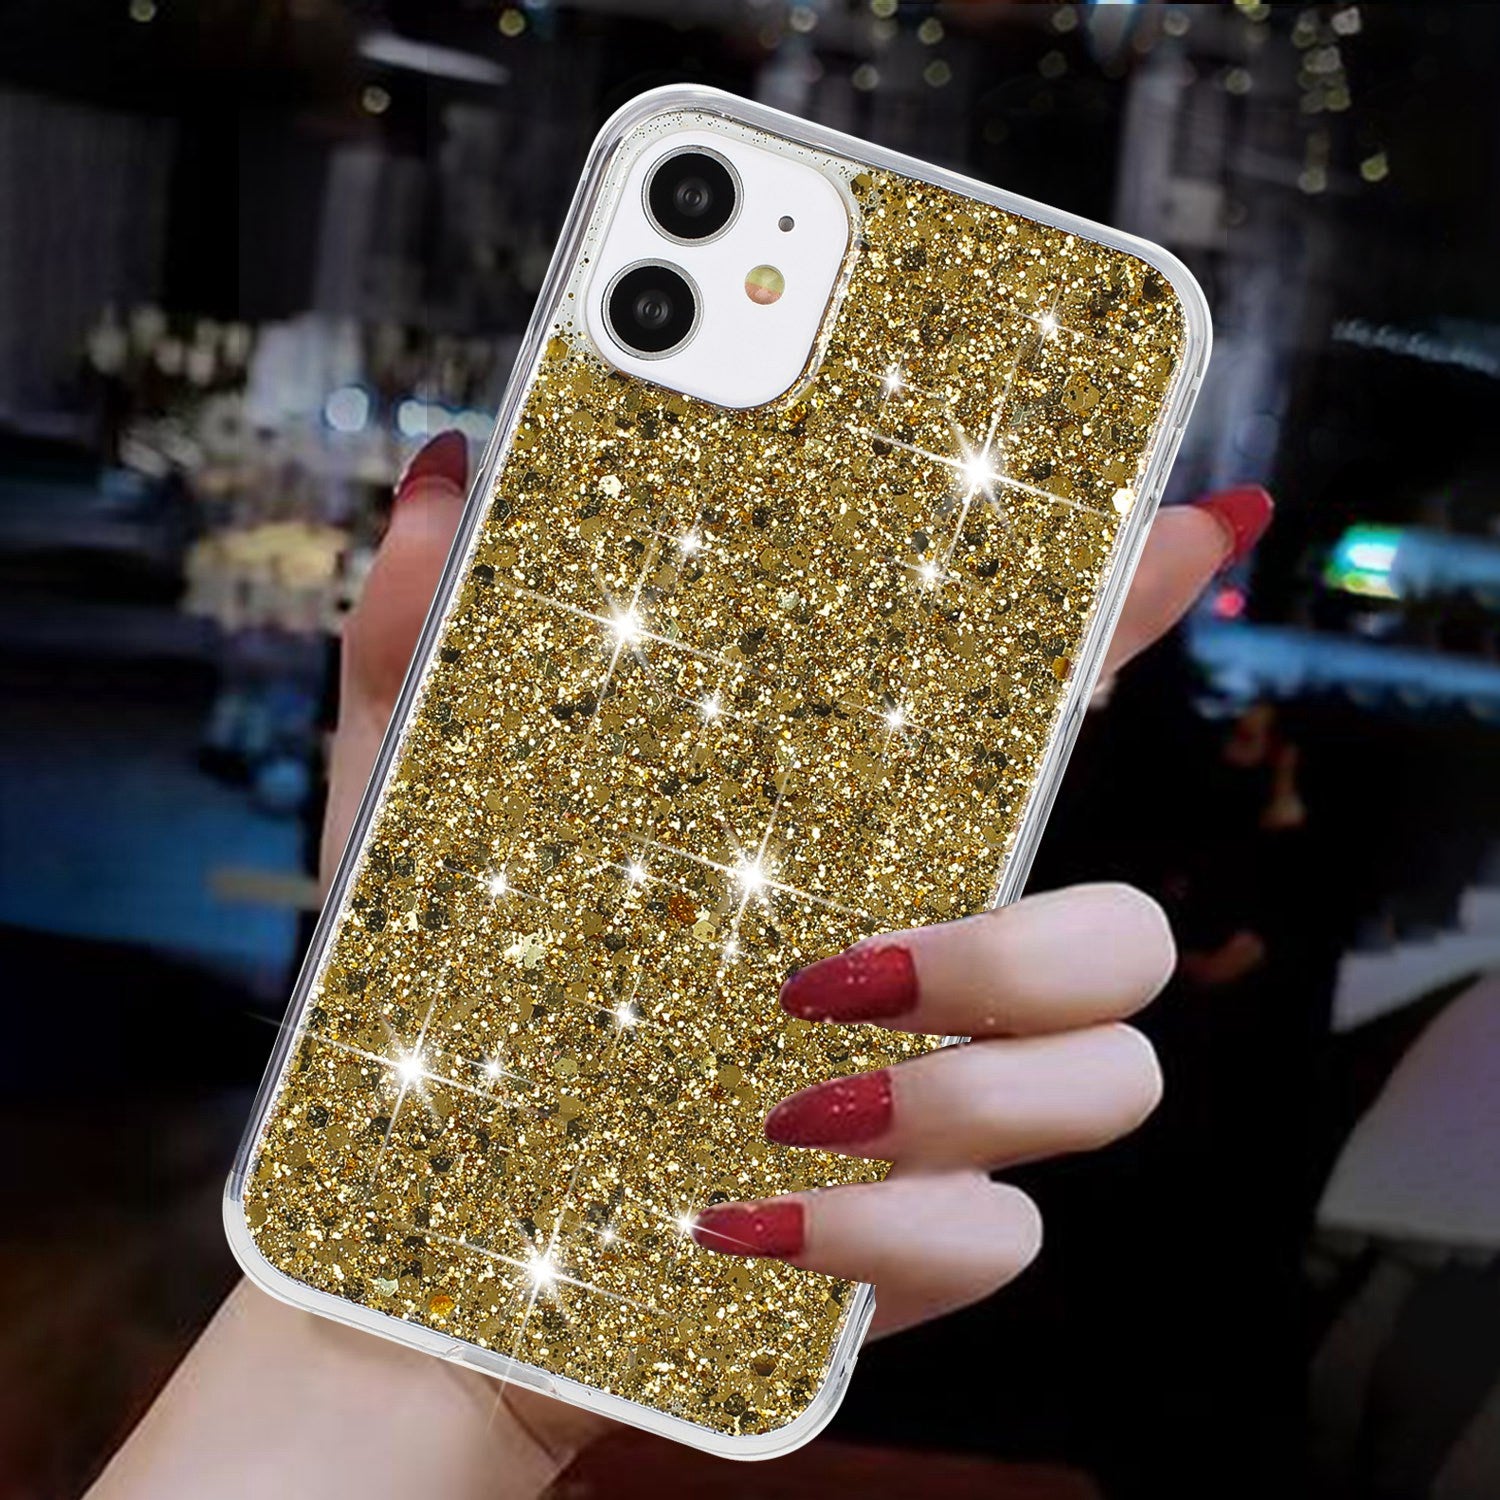 For iPhone 11 Phone Case Slim-Fit Glittery Powder Decor Phone Cover Epoxy TPU Phone Shell - Gold